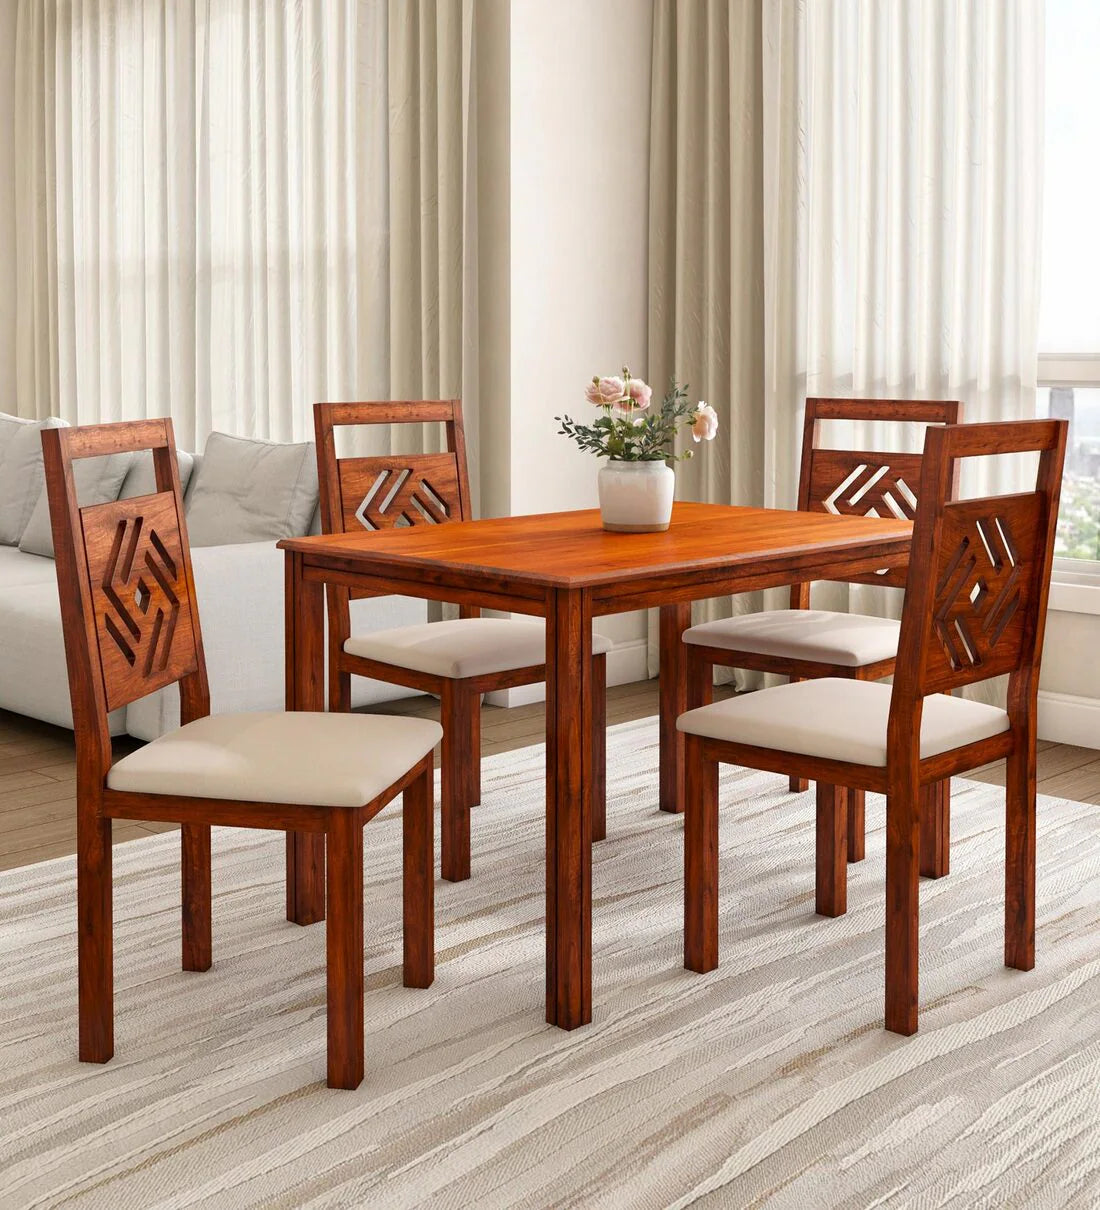 Solid Wood 4 Seater Dining Set In Honey Brown Finish